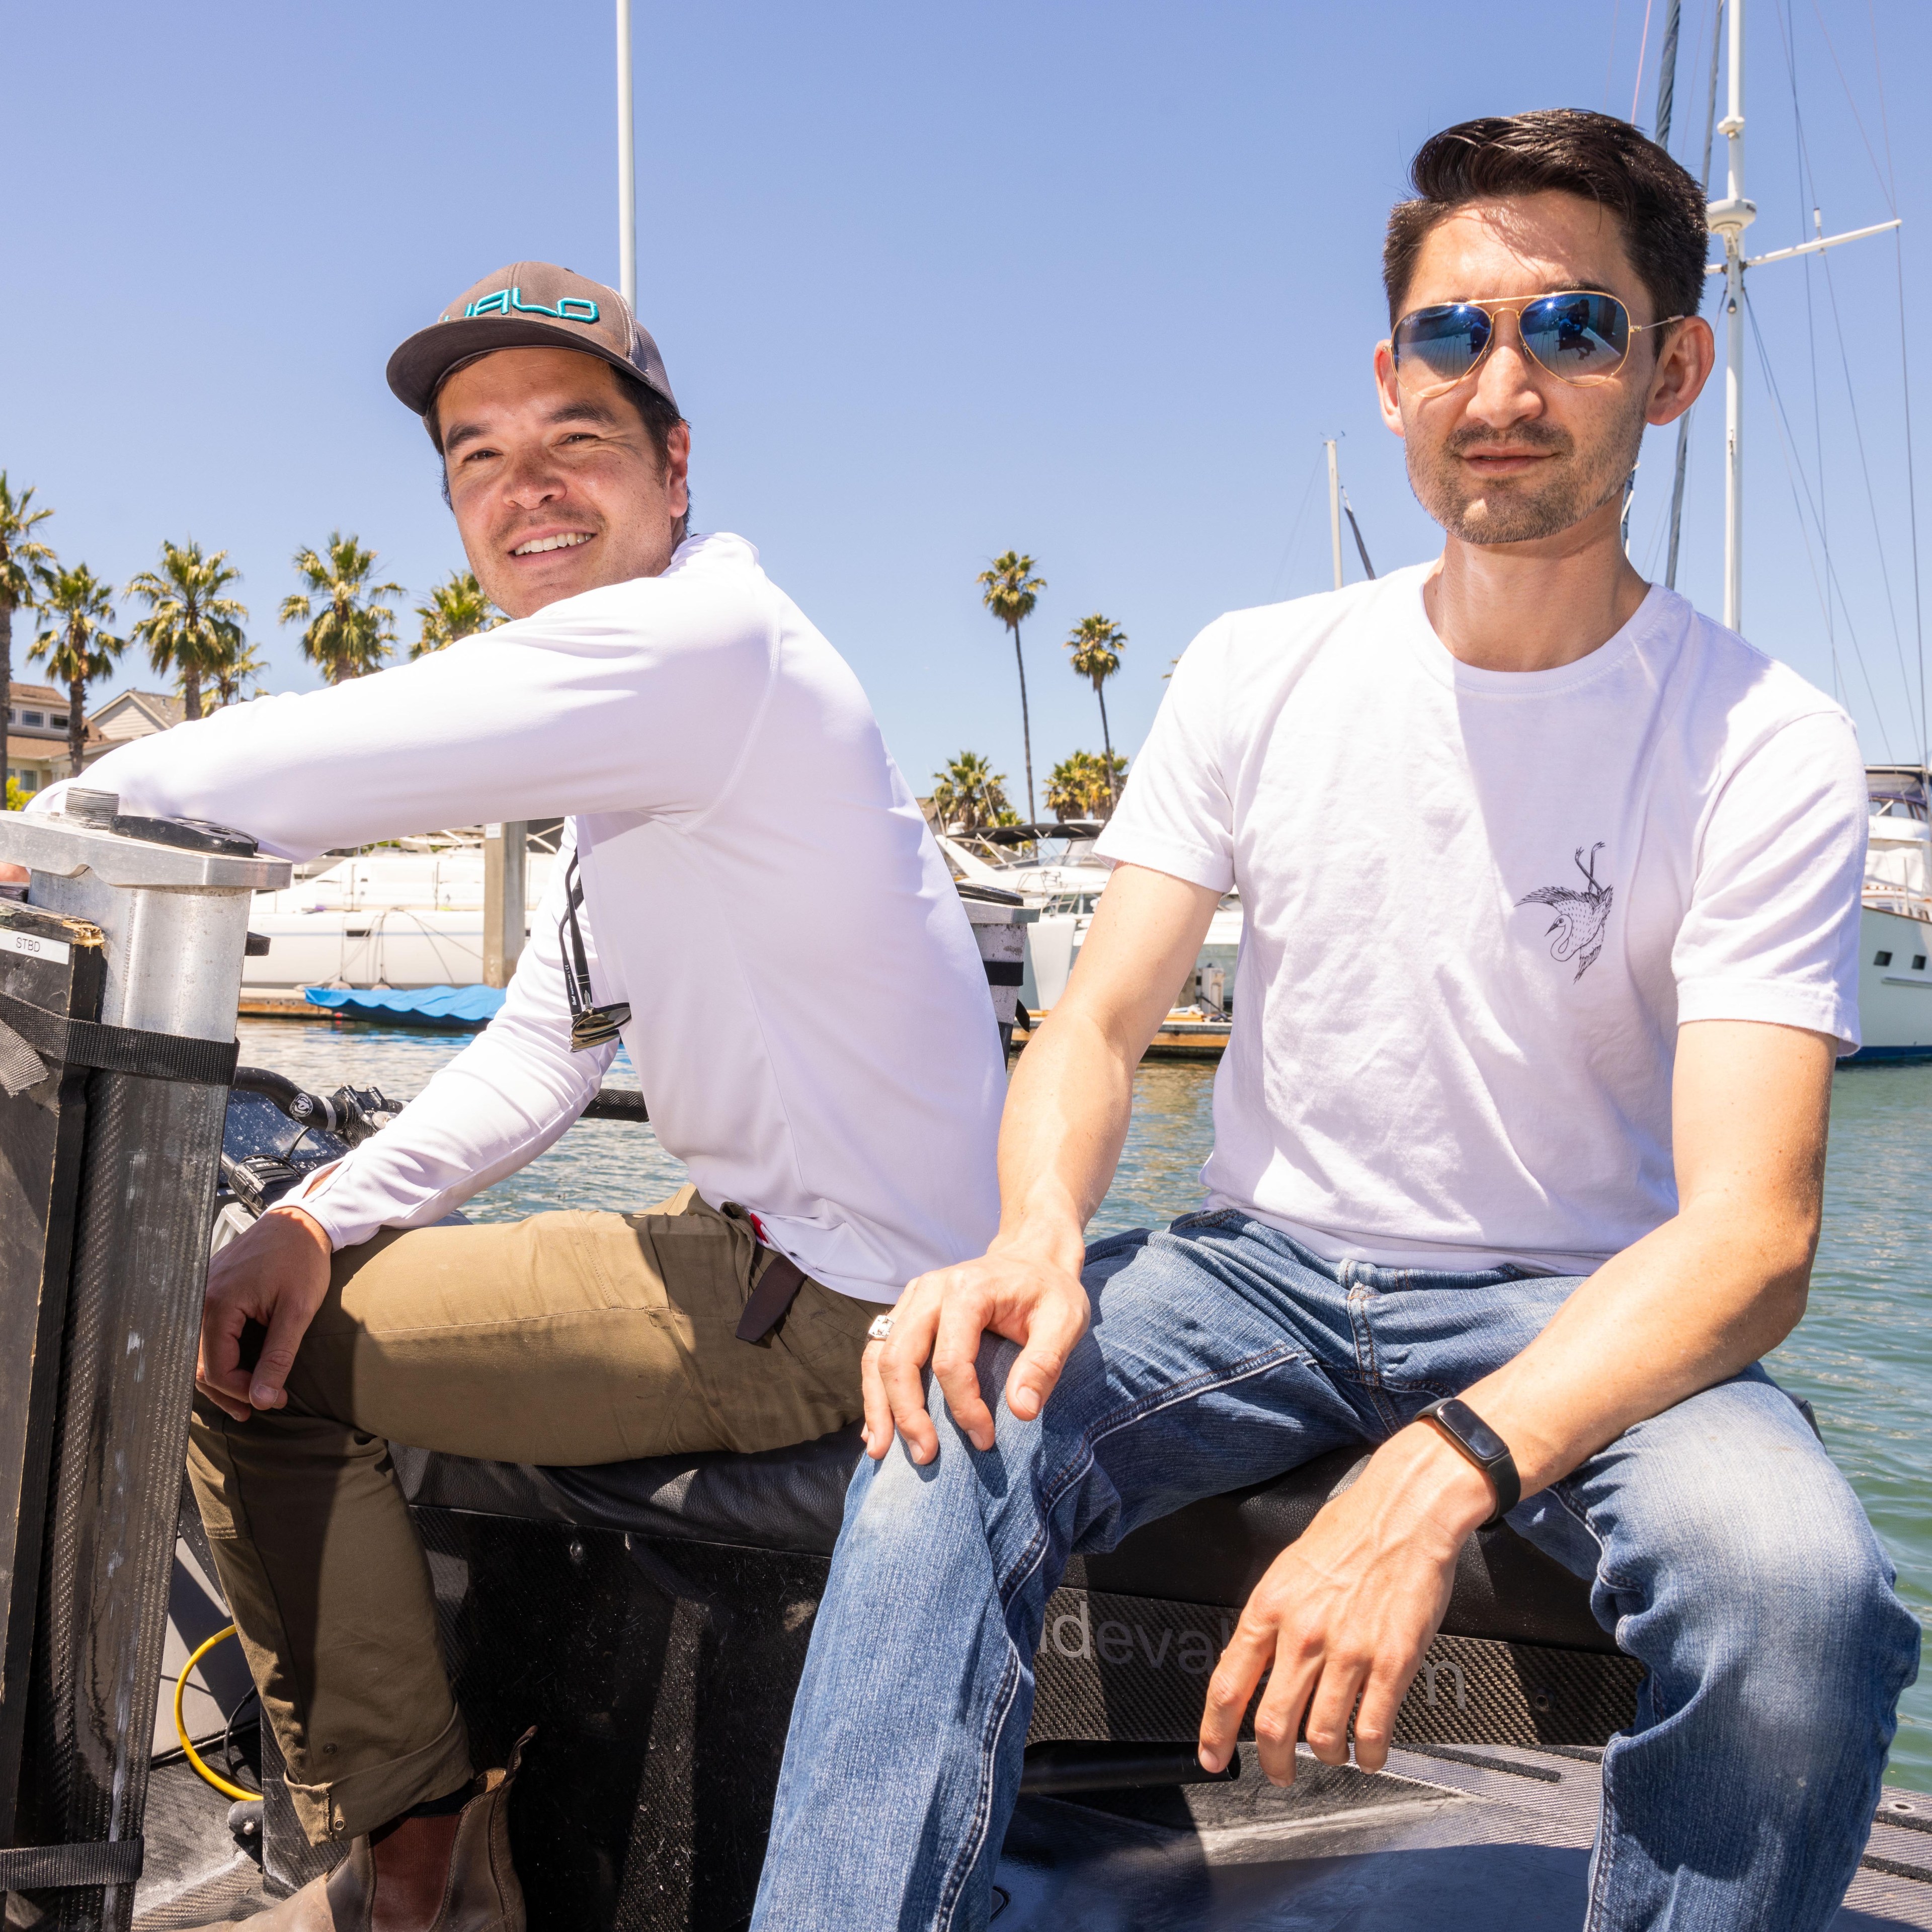 Two men are sitting on a boat docked at a marina, with yachts and palm trees in the background. One wears a cap and white long-sleeve, the other sunglasses and a white t-shirt.